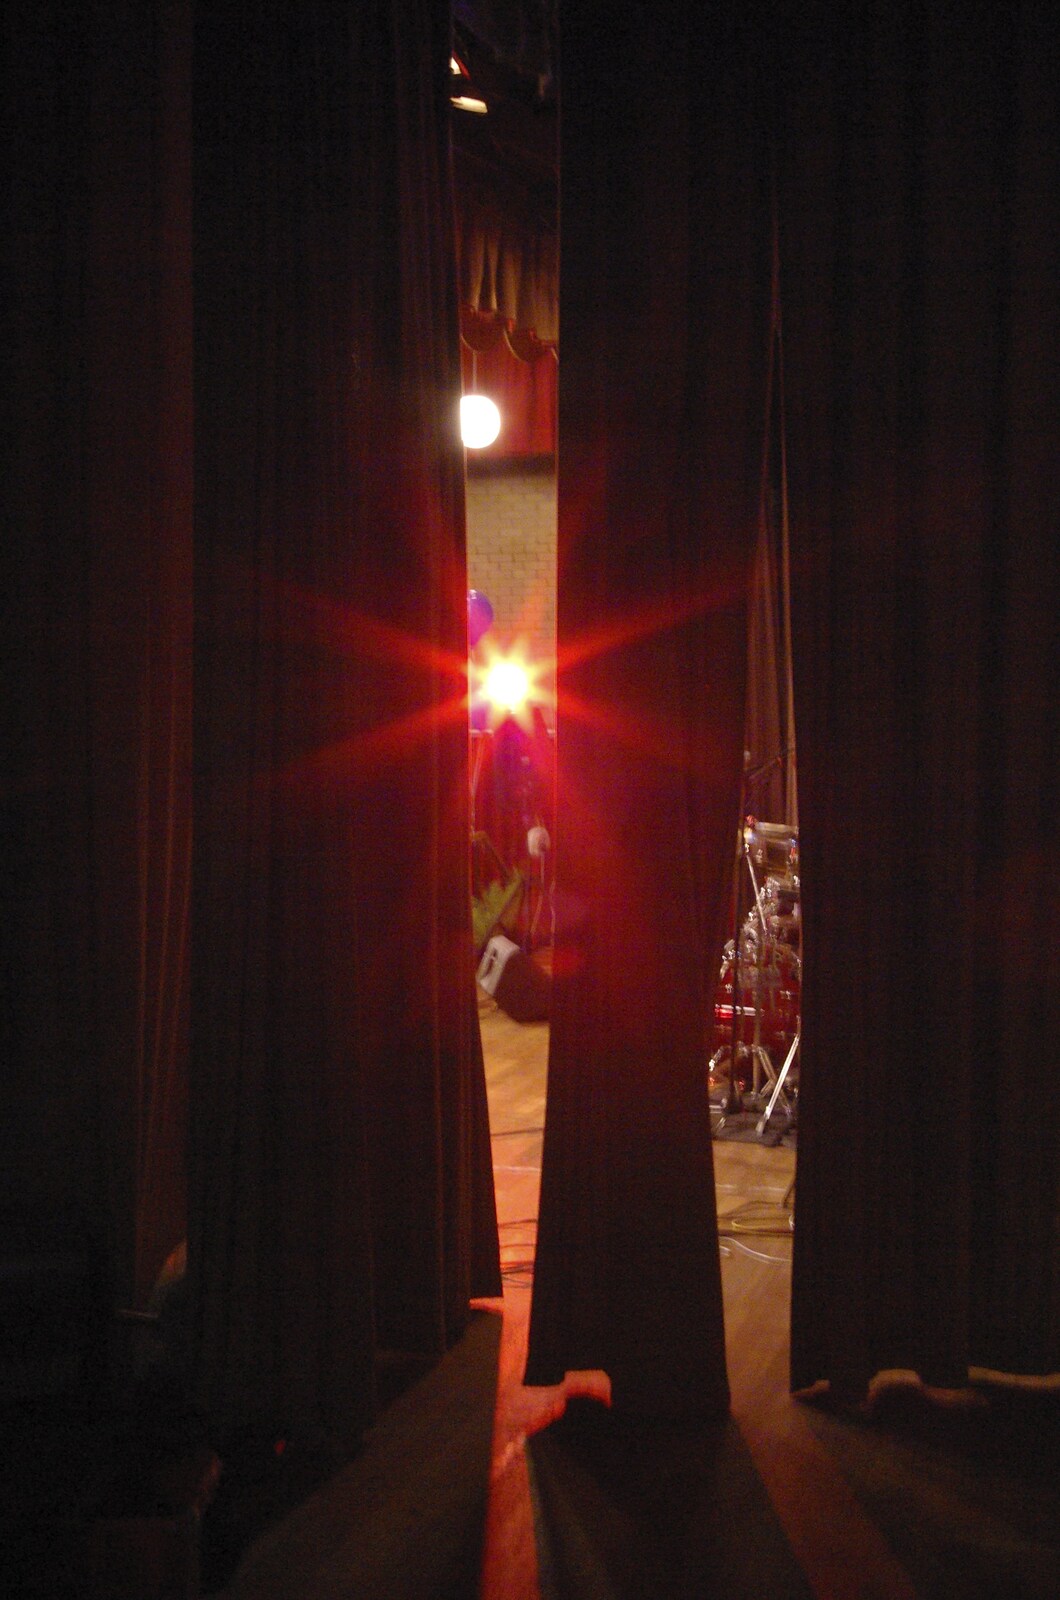 The BBs at the Carnegie Rooms, and a Mill Road Miscellany, Thetford and Cambridge - 22nd April 2008: A stage light through a curtain